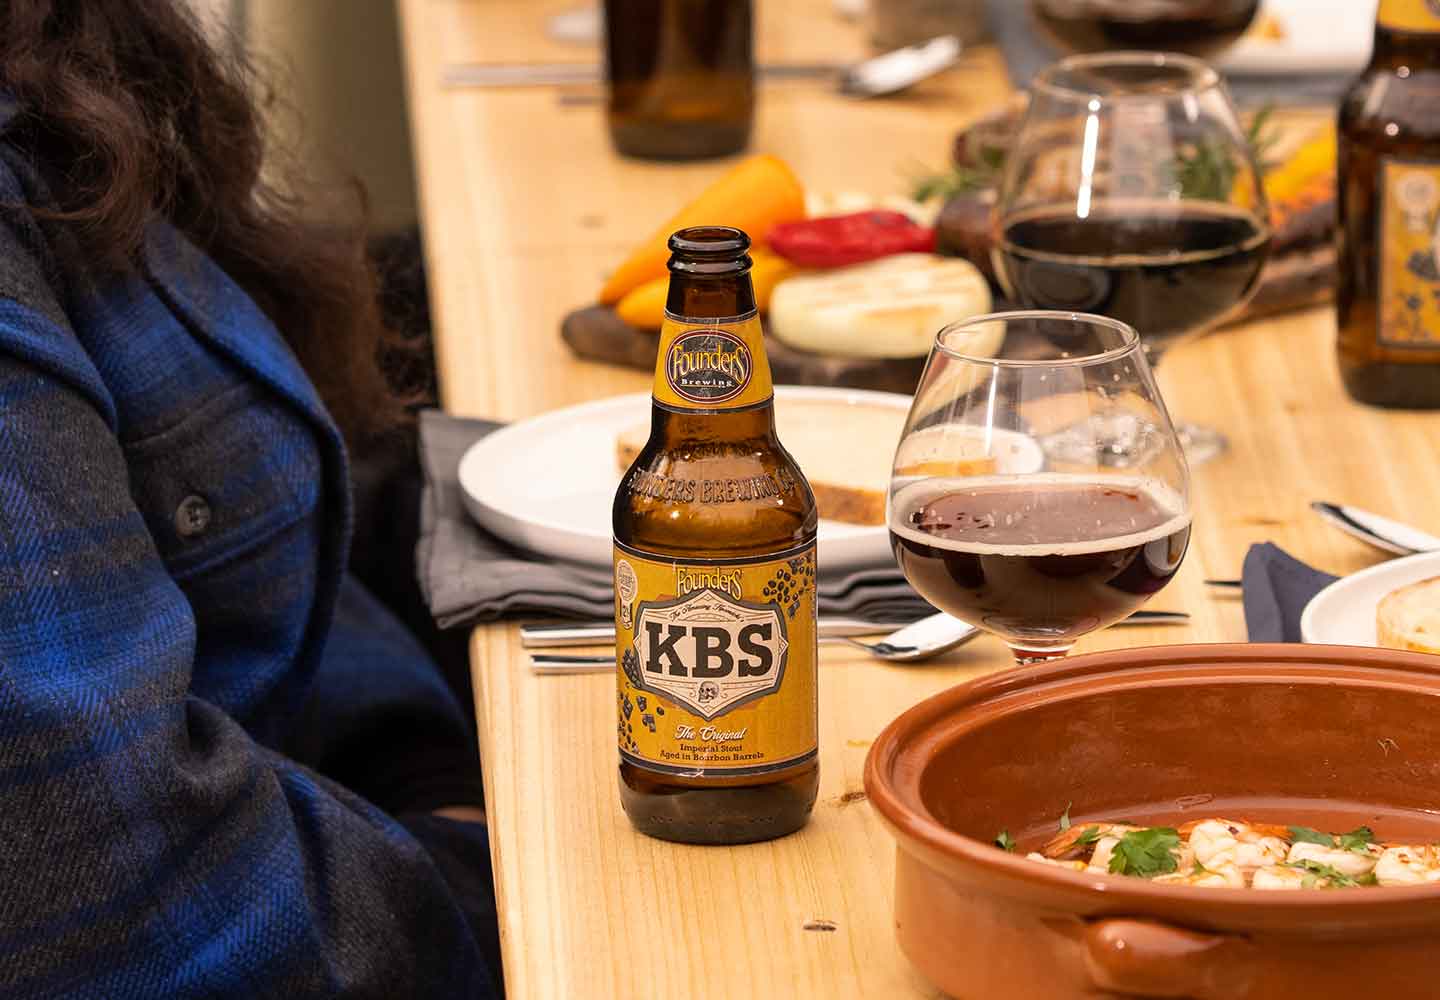 Bottle of KBS on table with snifters and food